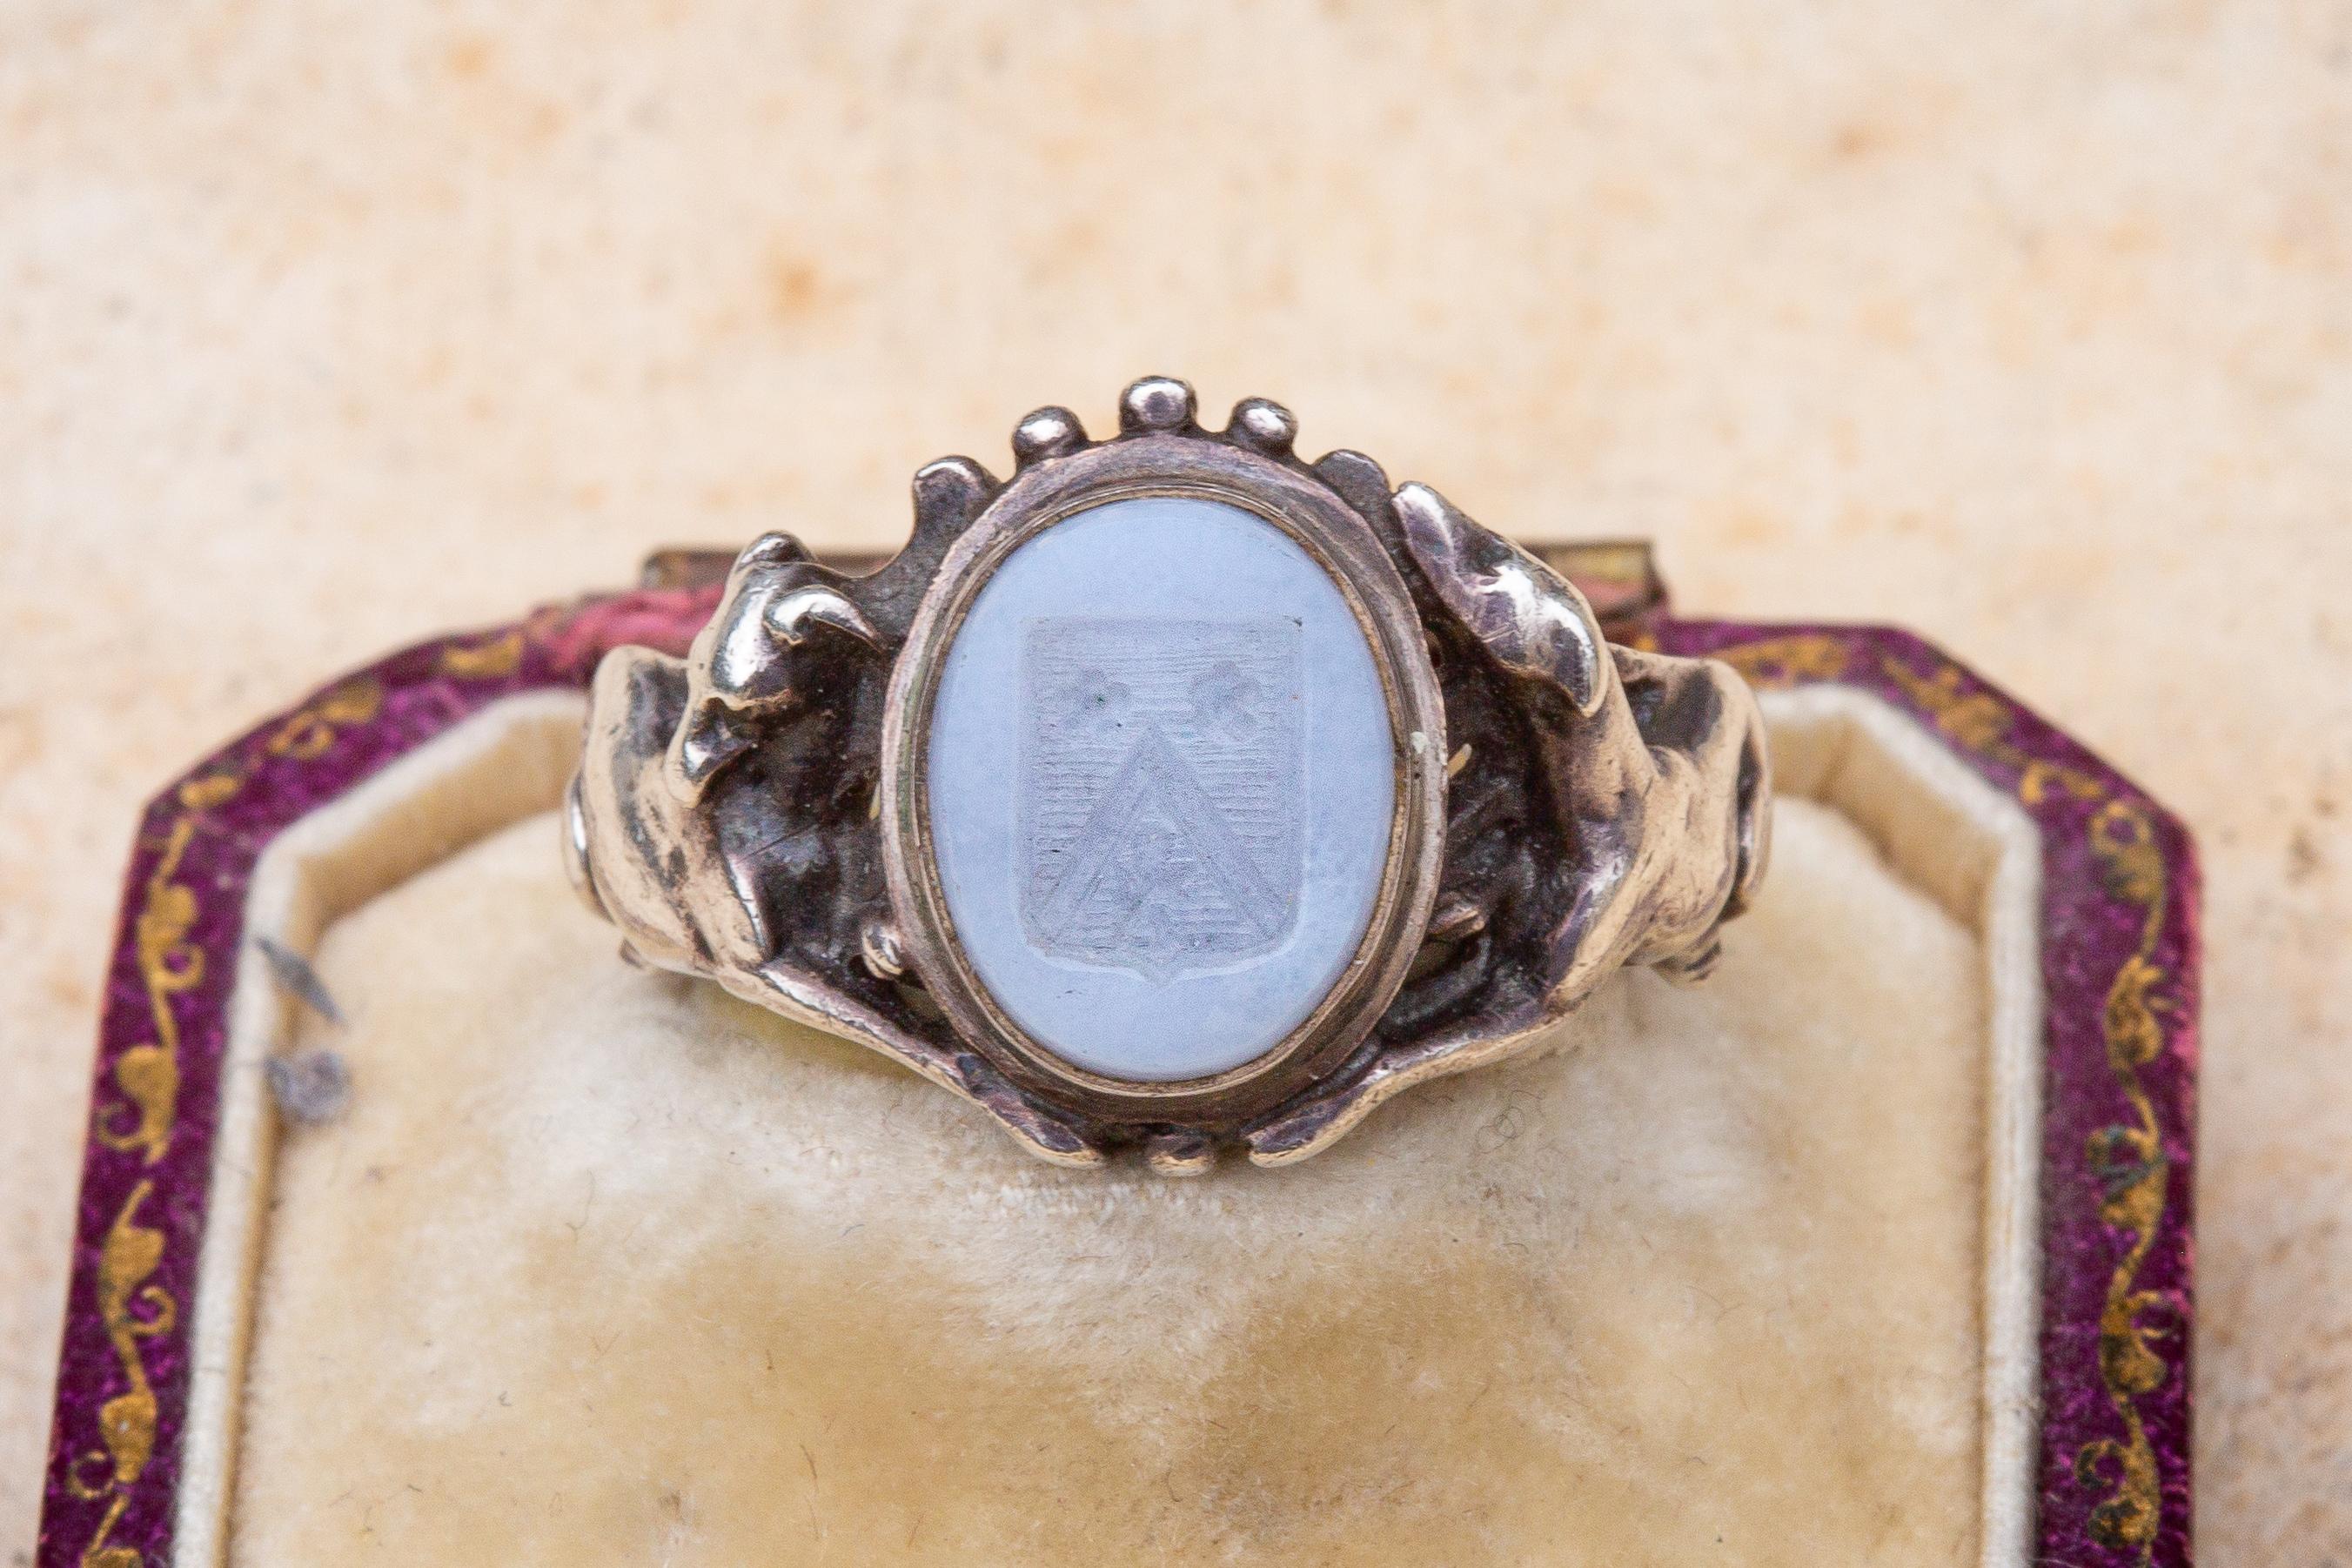 French Neo-Renaissance Intaglio Signet Ring Manner of Wièse & Froment-Meurice For Sale 3